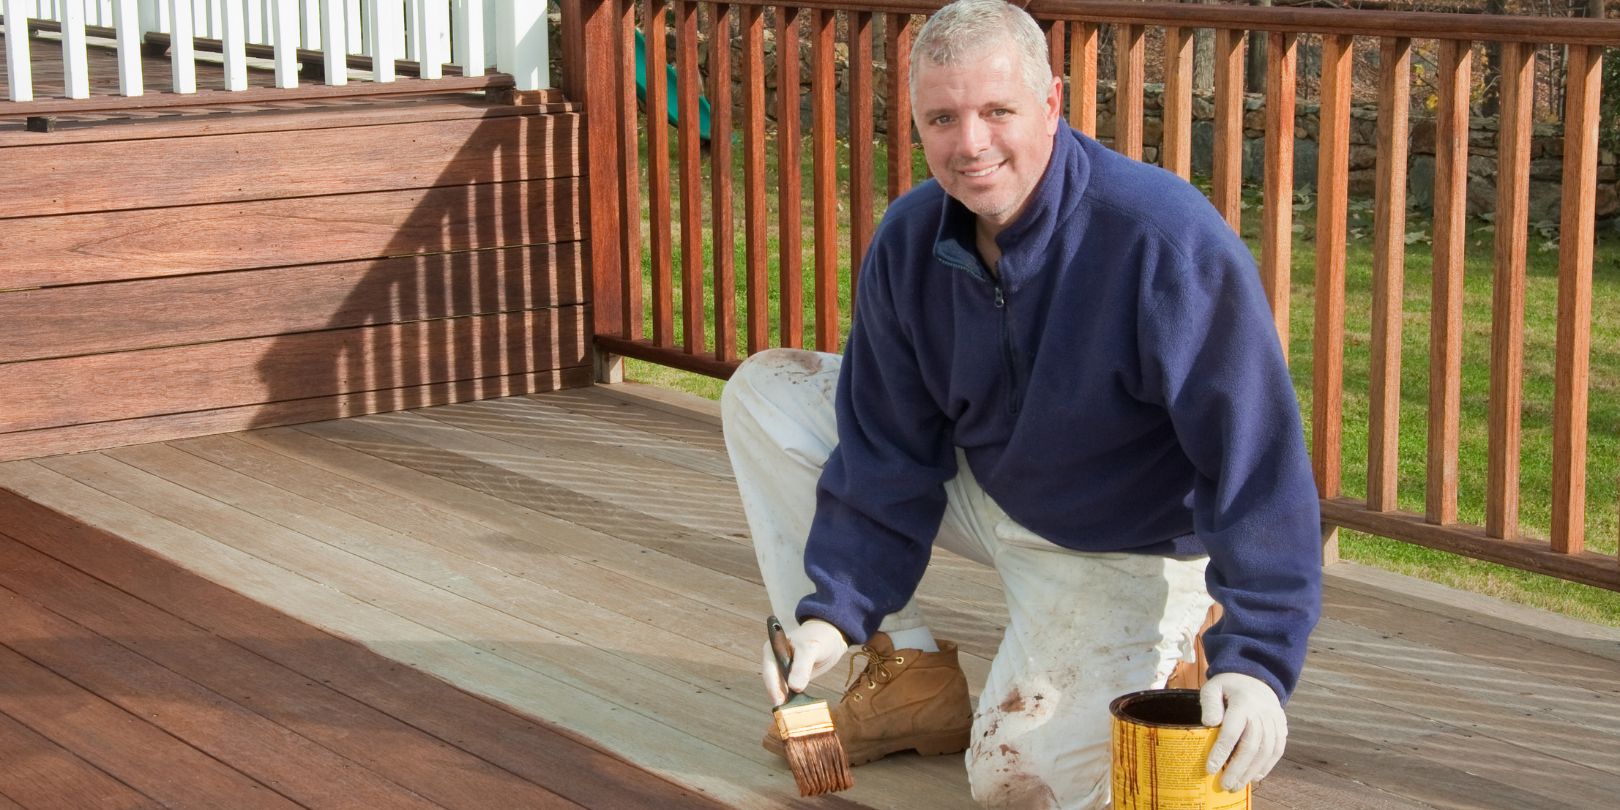 painter or handyman staining a deck